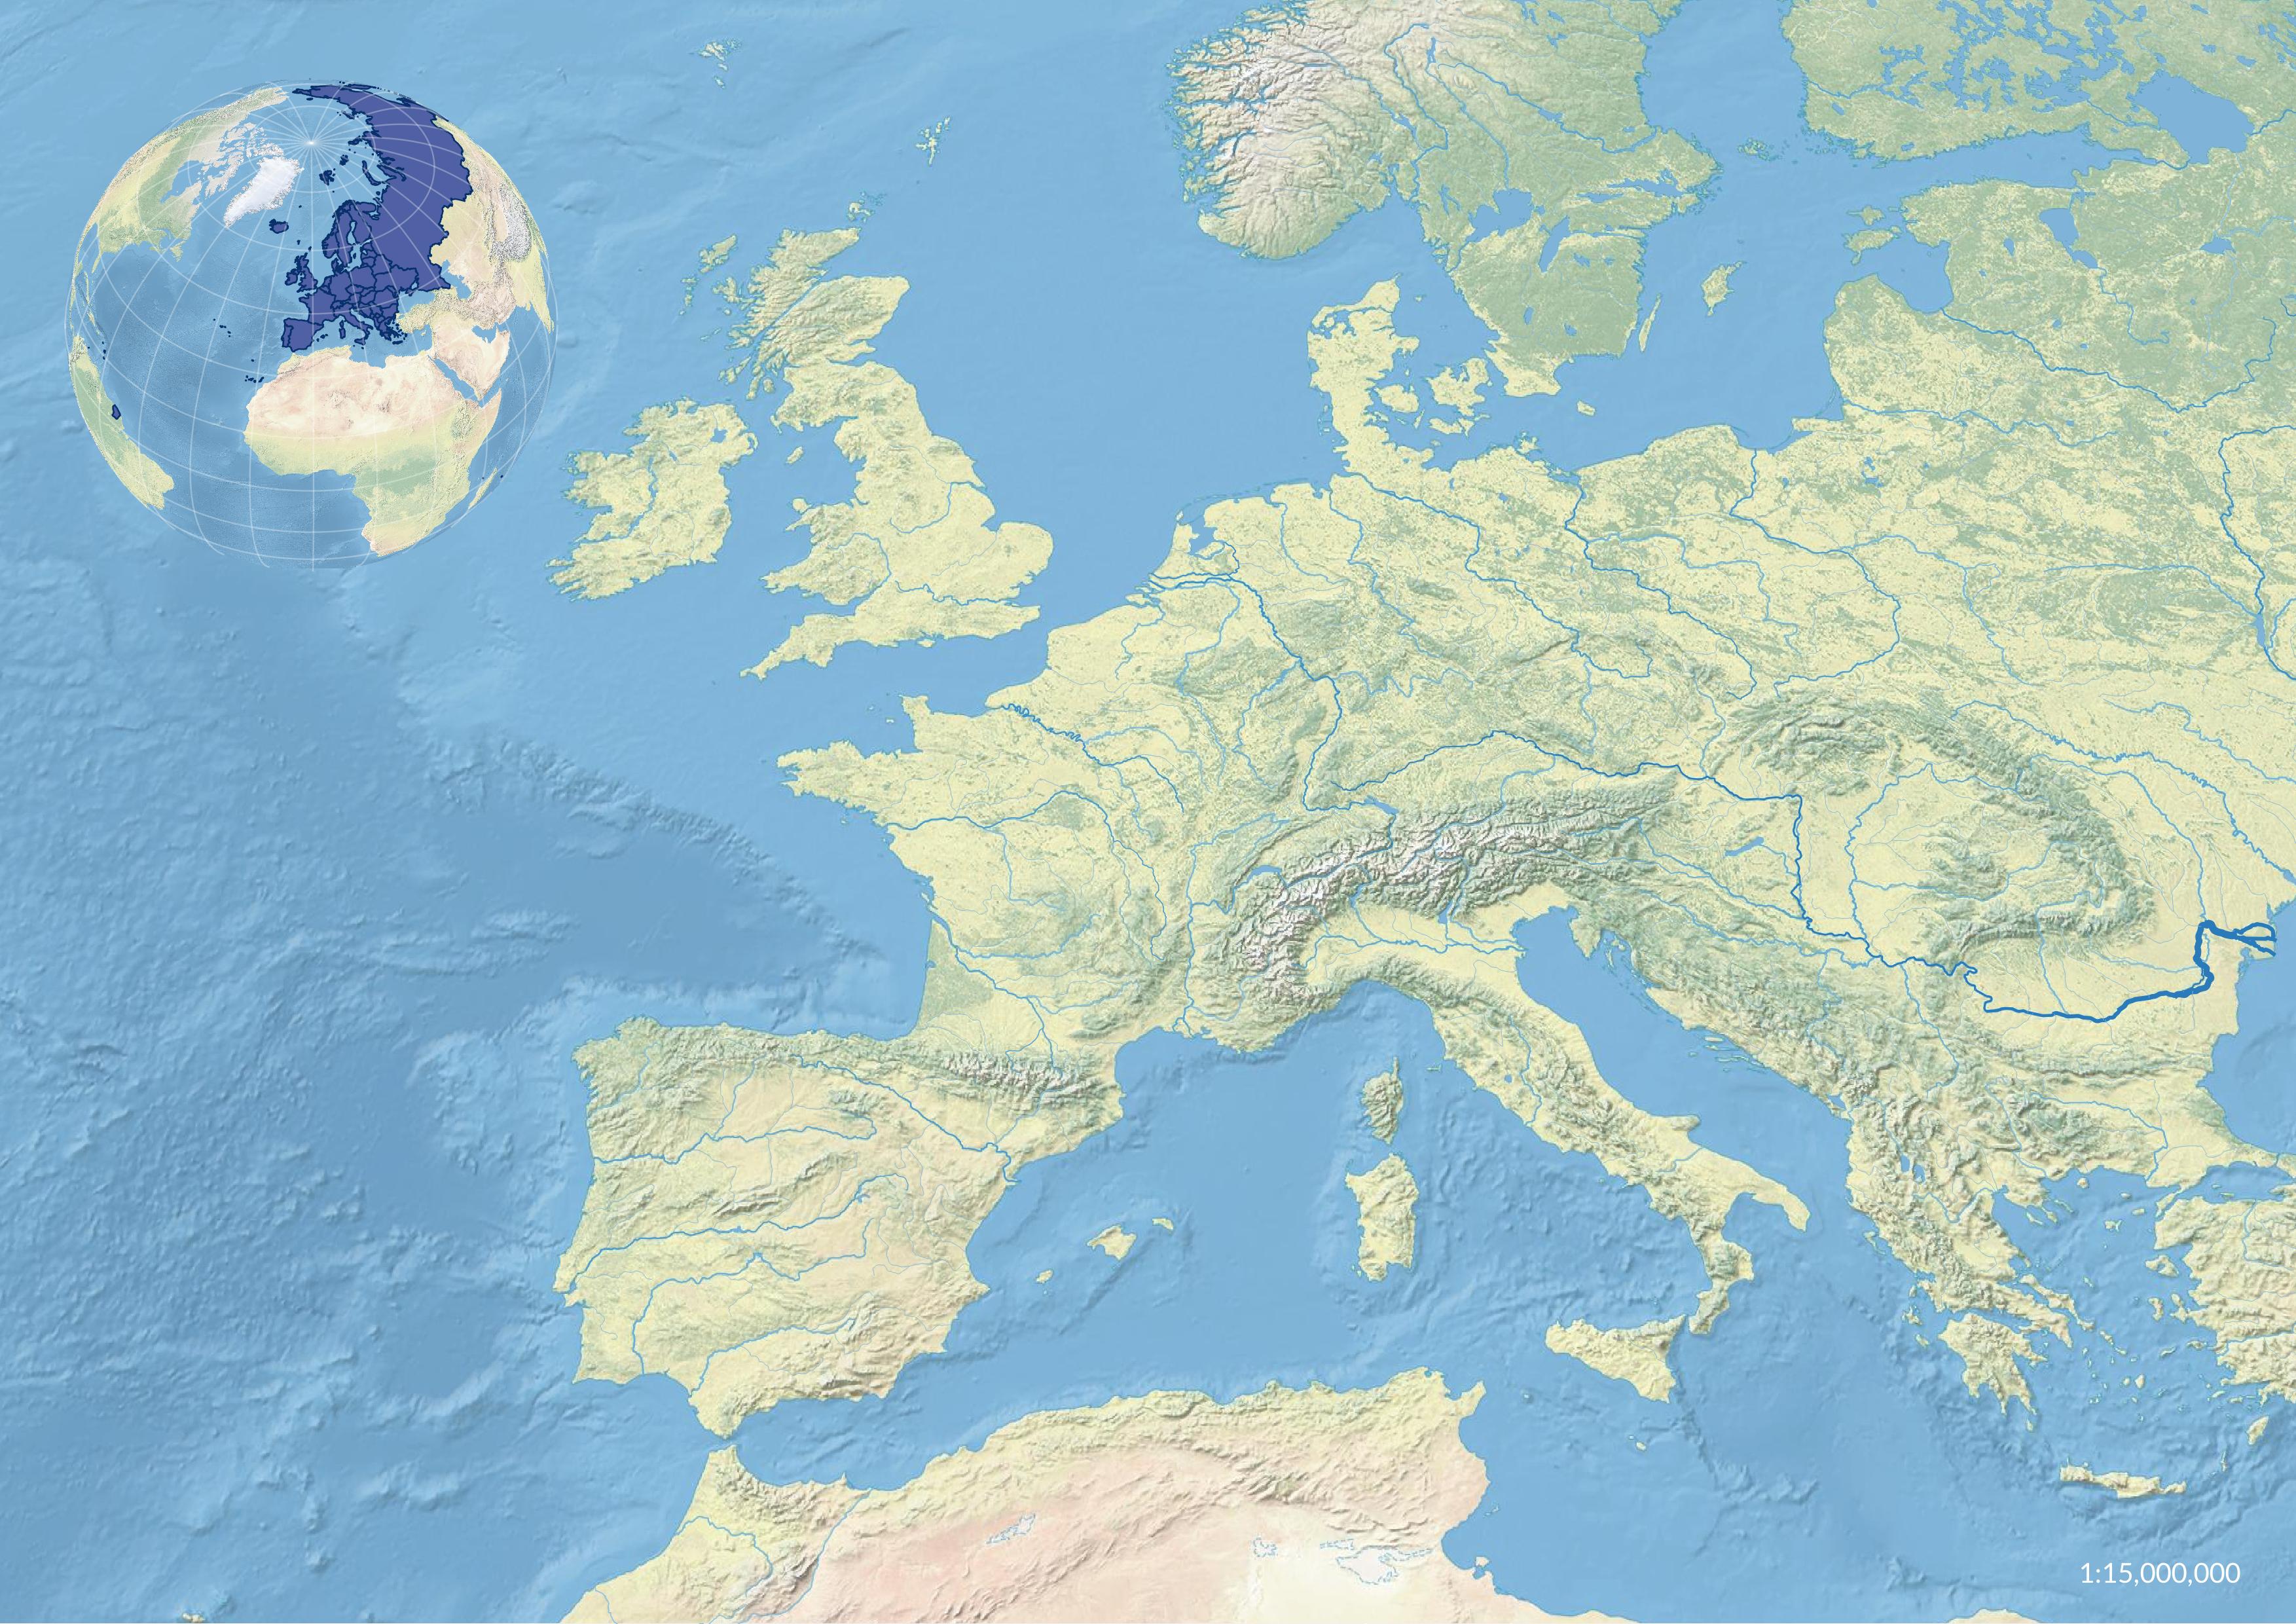 Natural Earth Map of Europe with Rivers